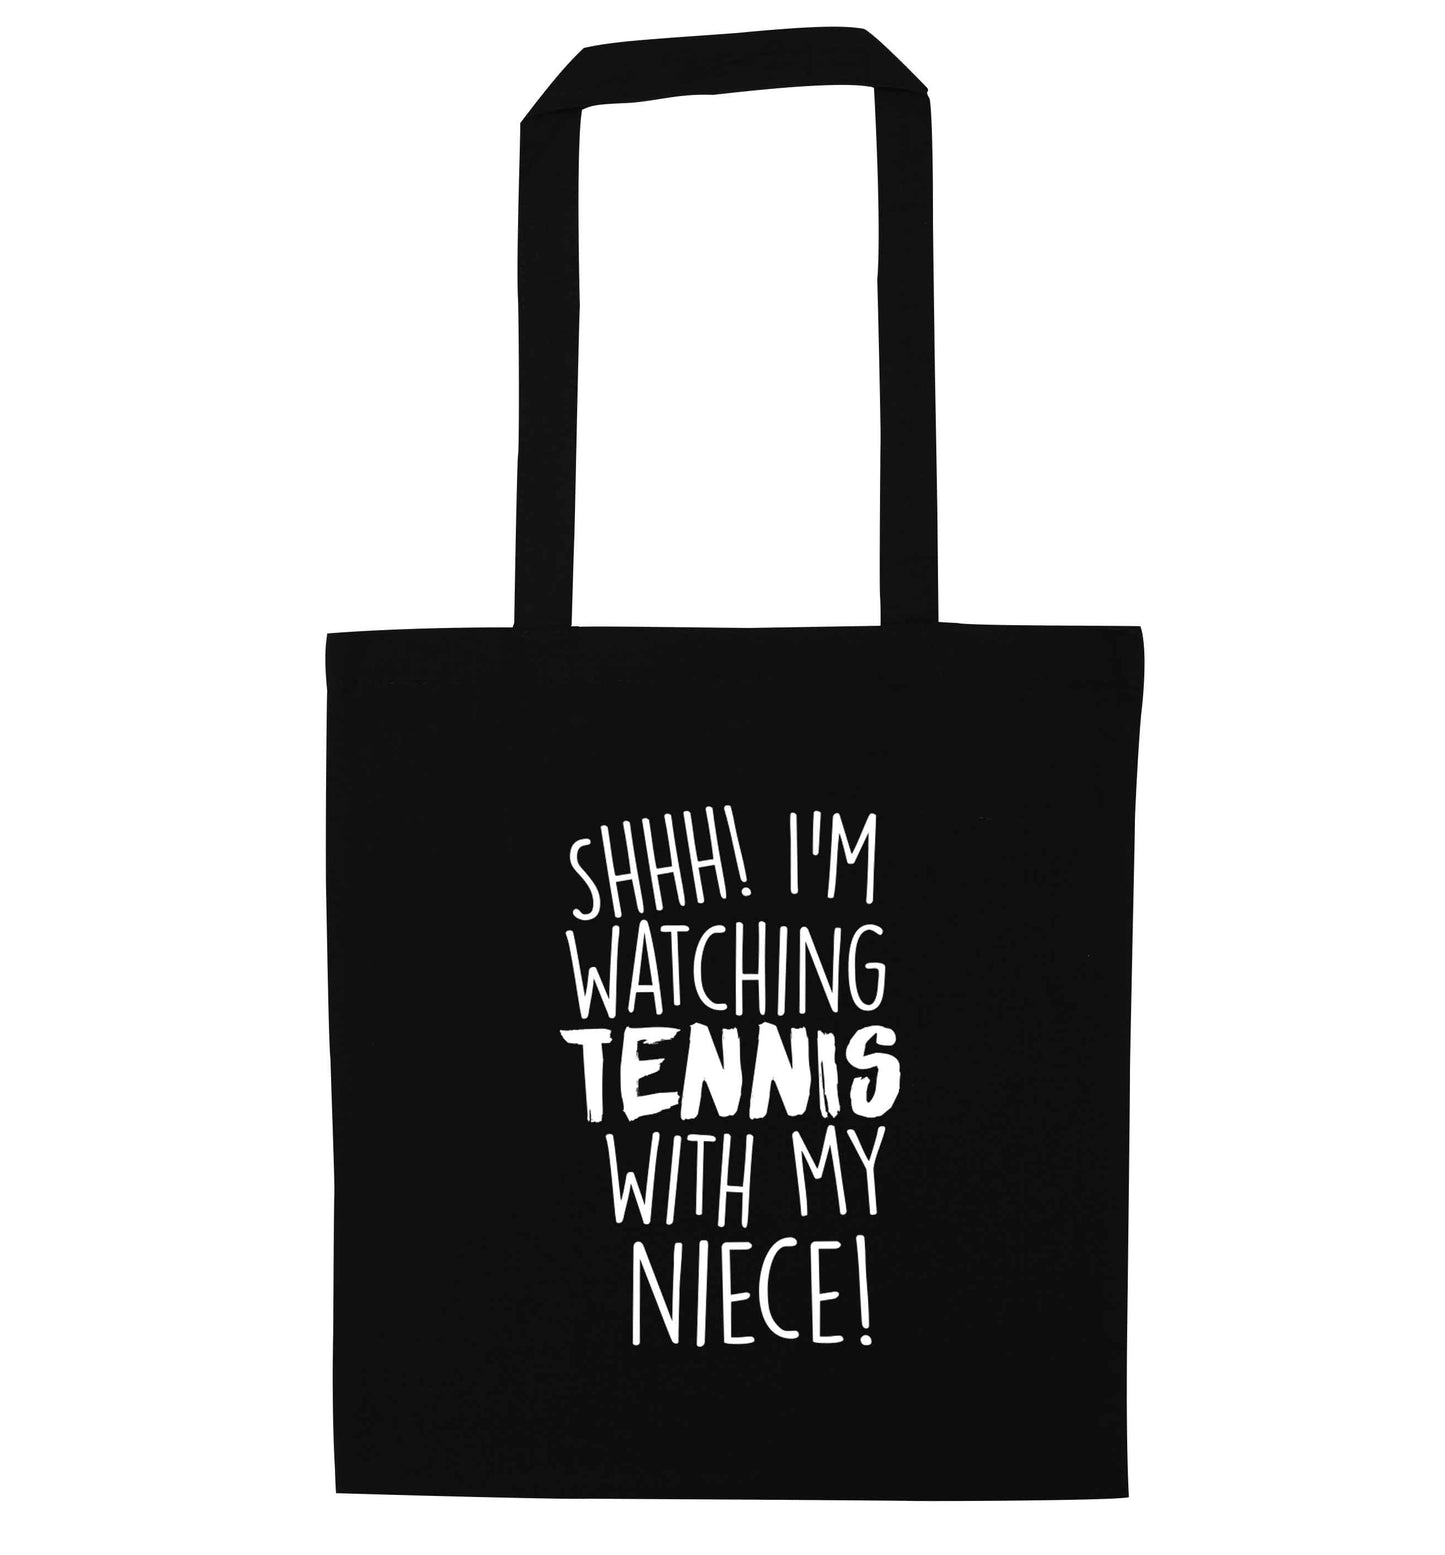 Shh! I'm watching tennis with my niece! black tote bag